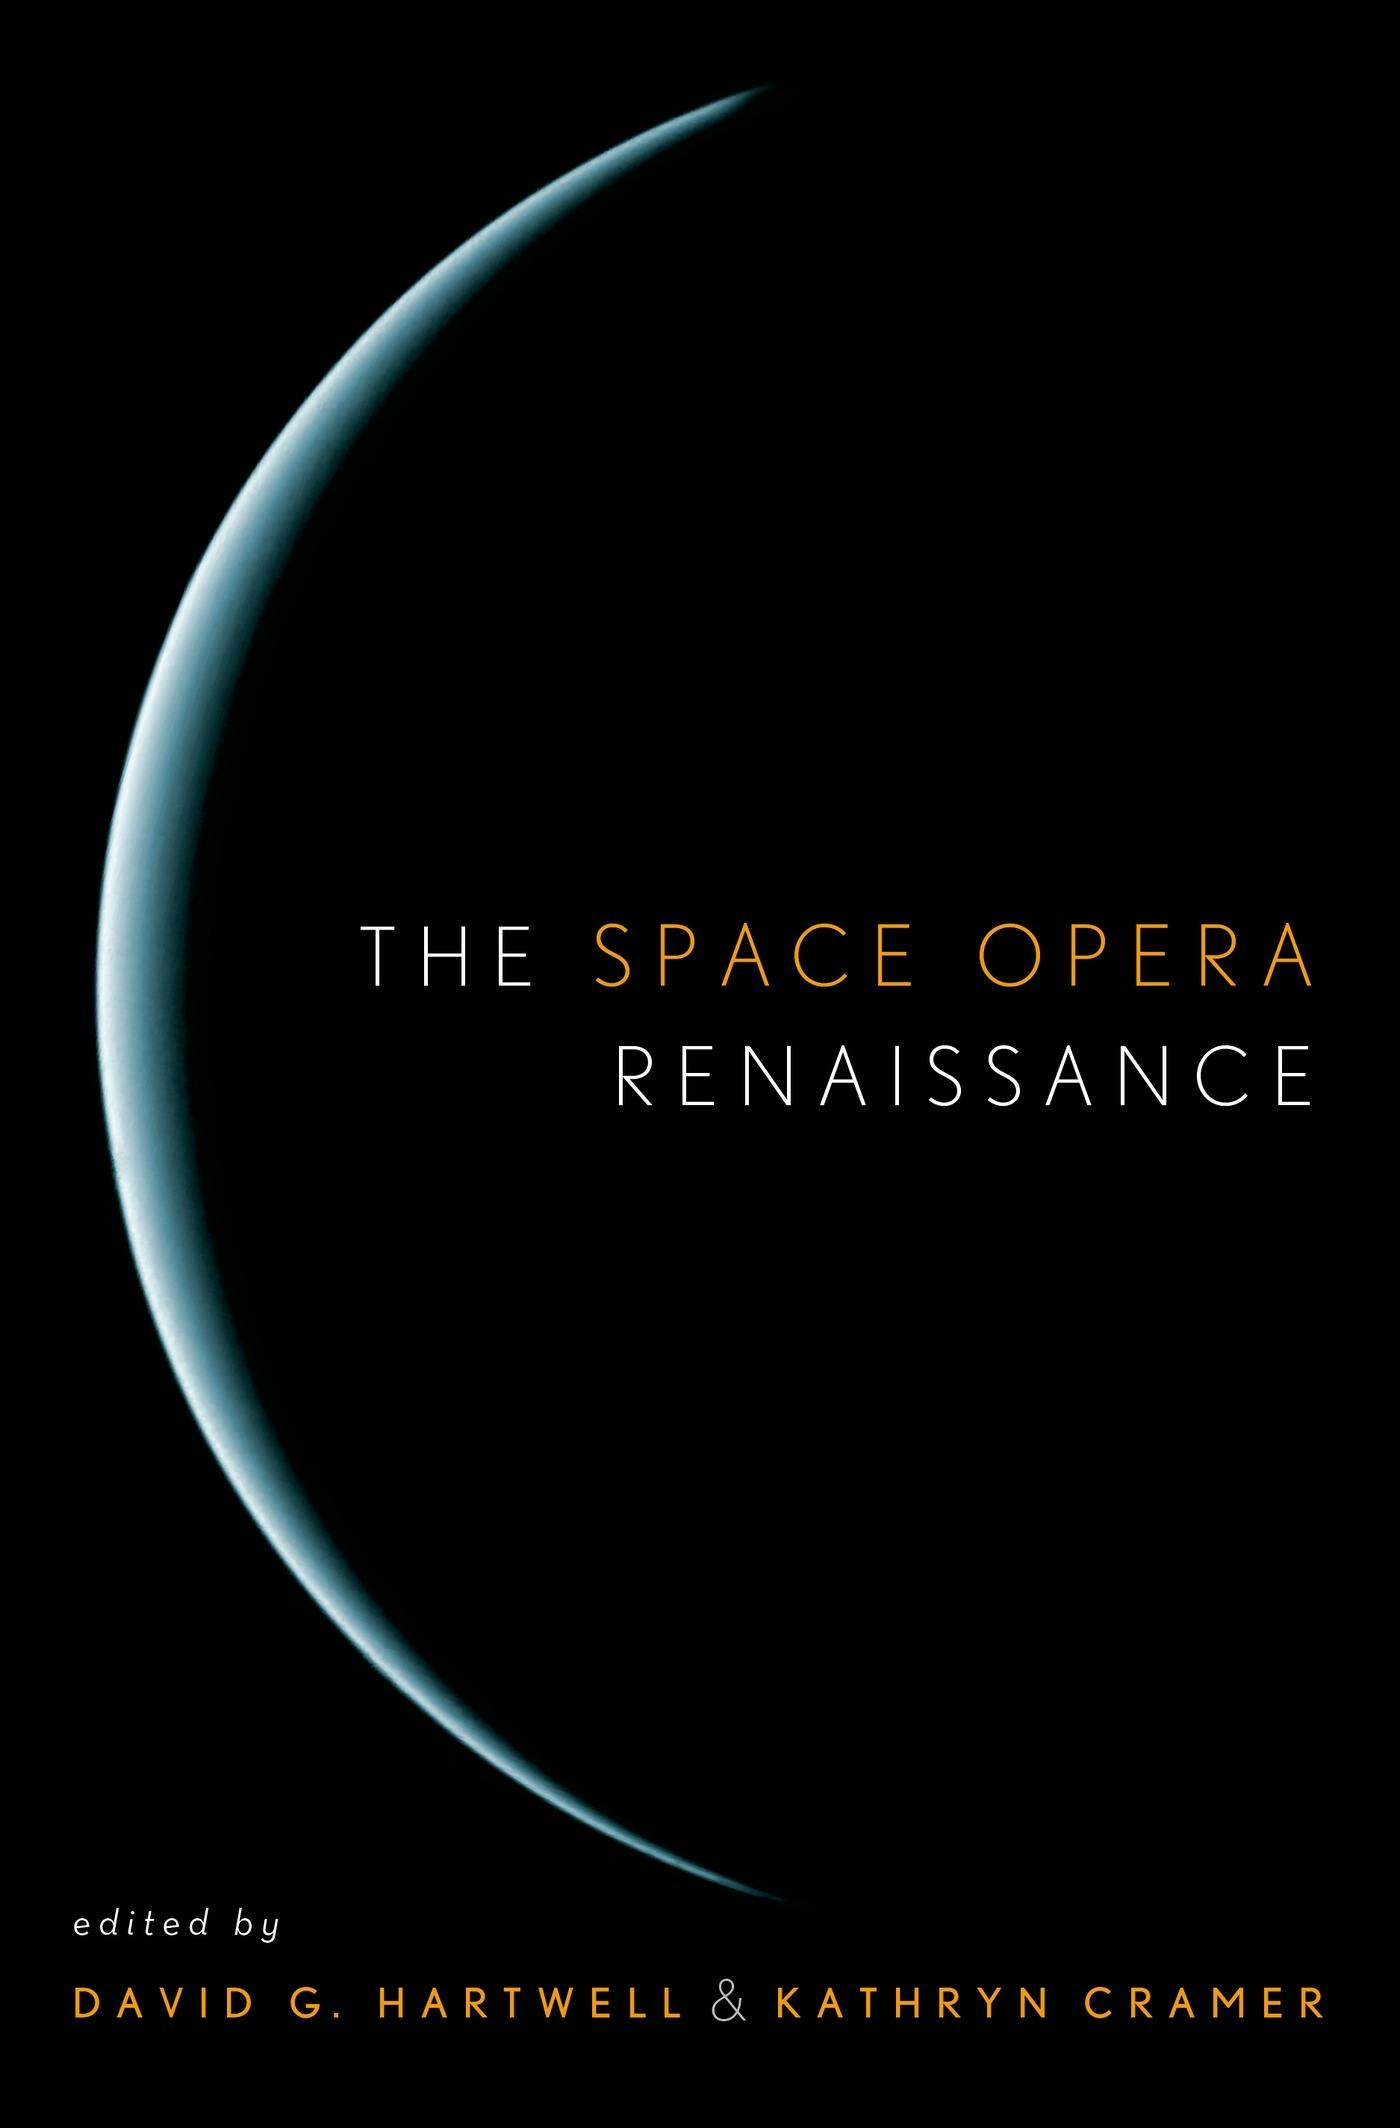 Cover for the book titled as: The Space Opera Renaissance